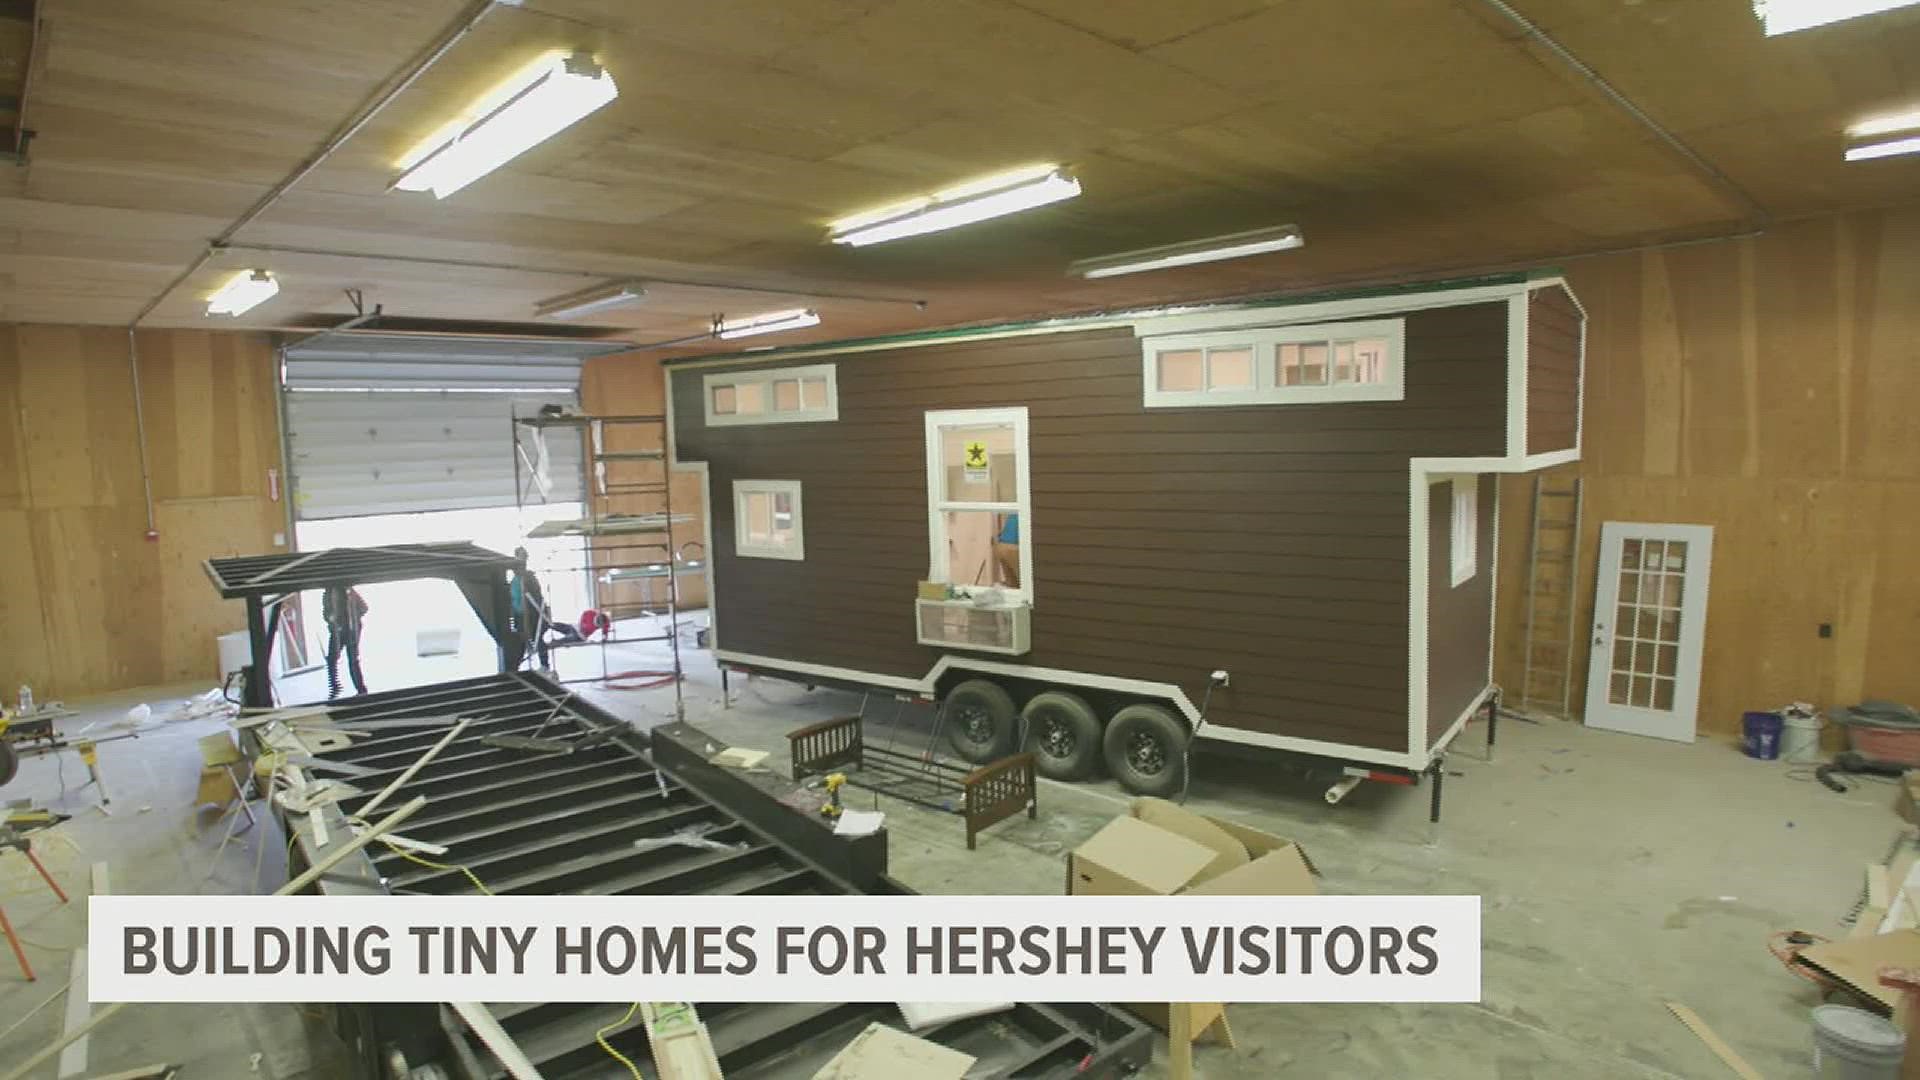 High school students building tiny homes for local campground visitors.